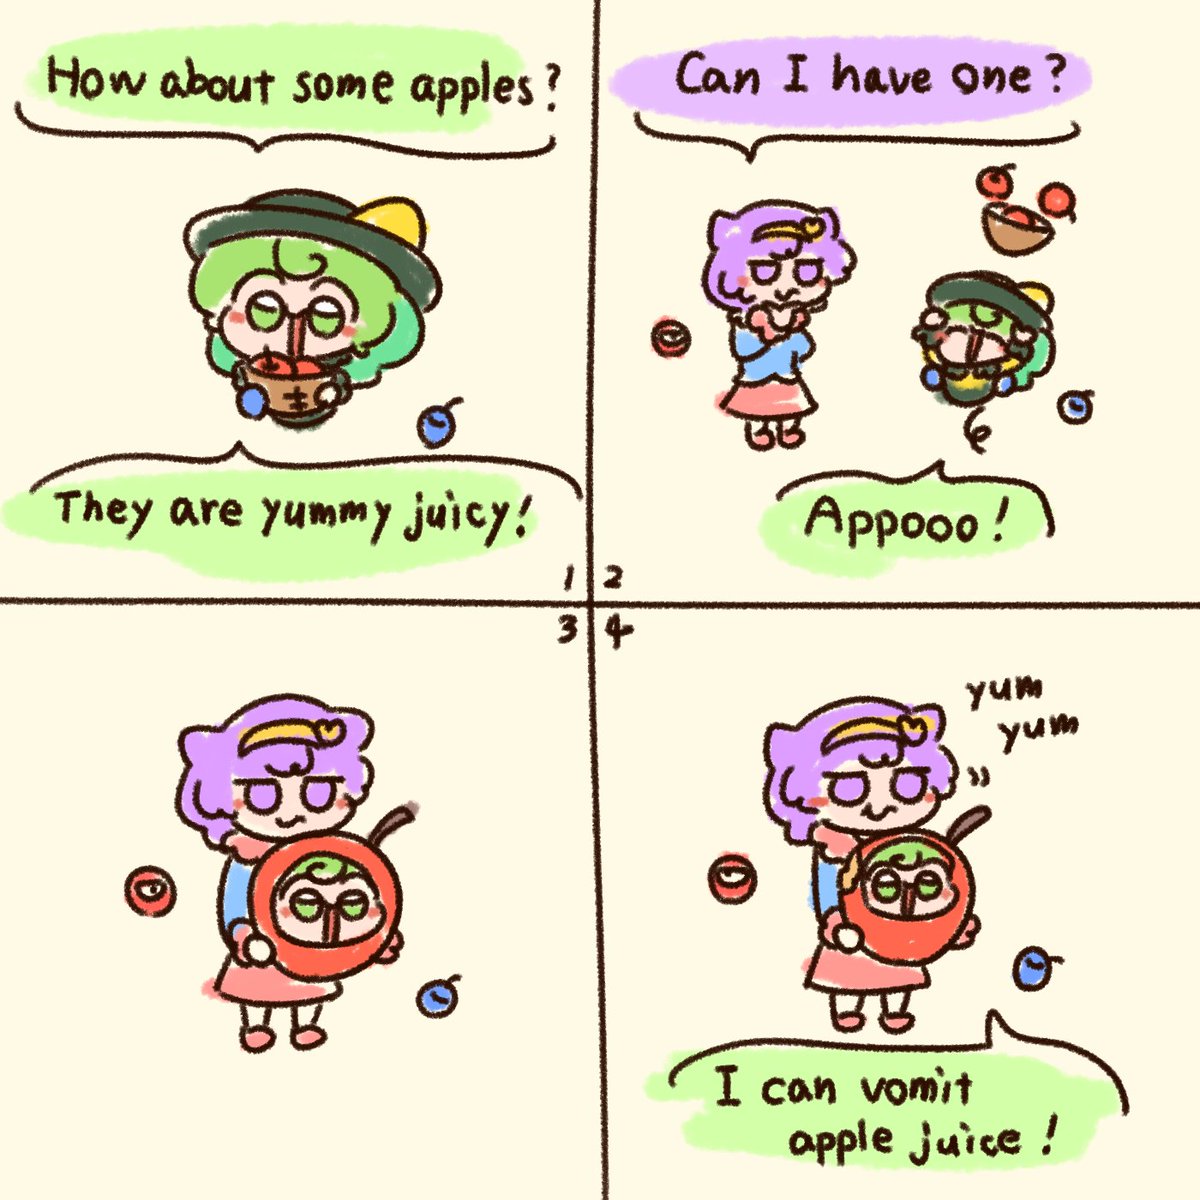 Koishie is good at an apple! 